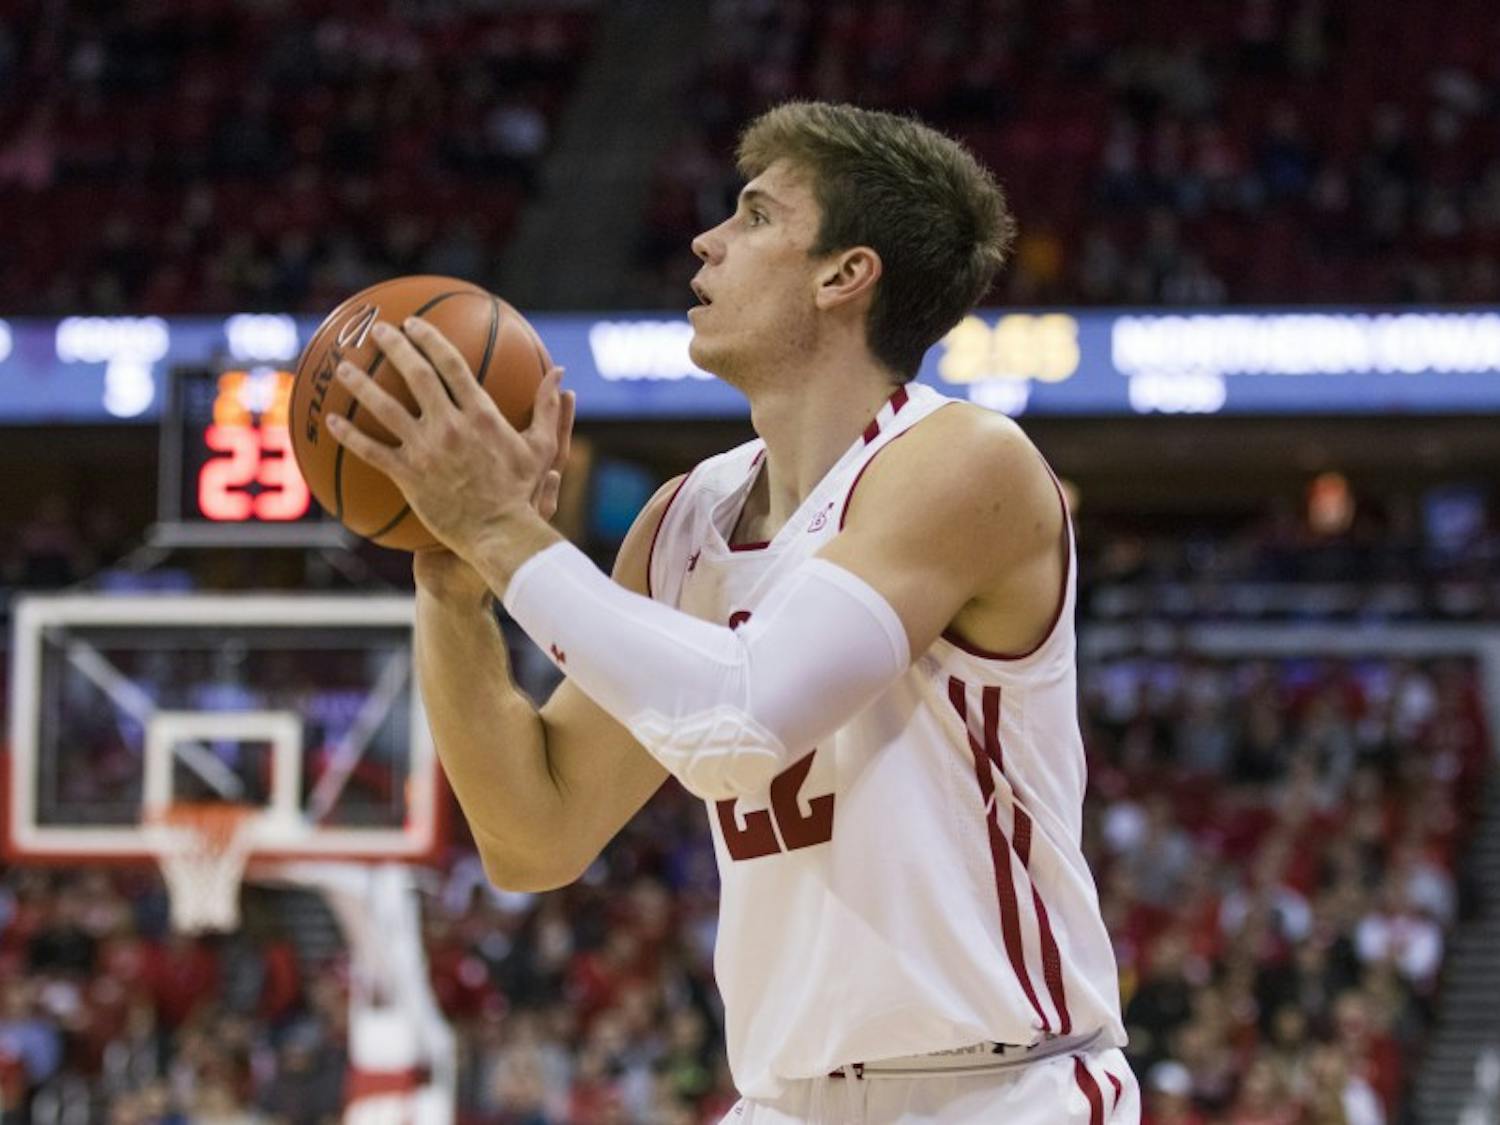 Senior forward&nbsp;Ethan Happ had 18 points and 11 rebounds as Wisconsin staged a second-half comeback to extend its winning streak to five games.